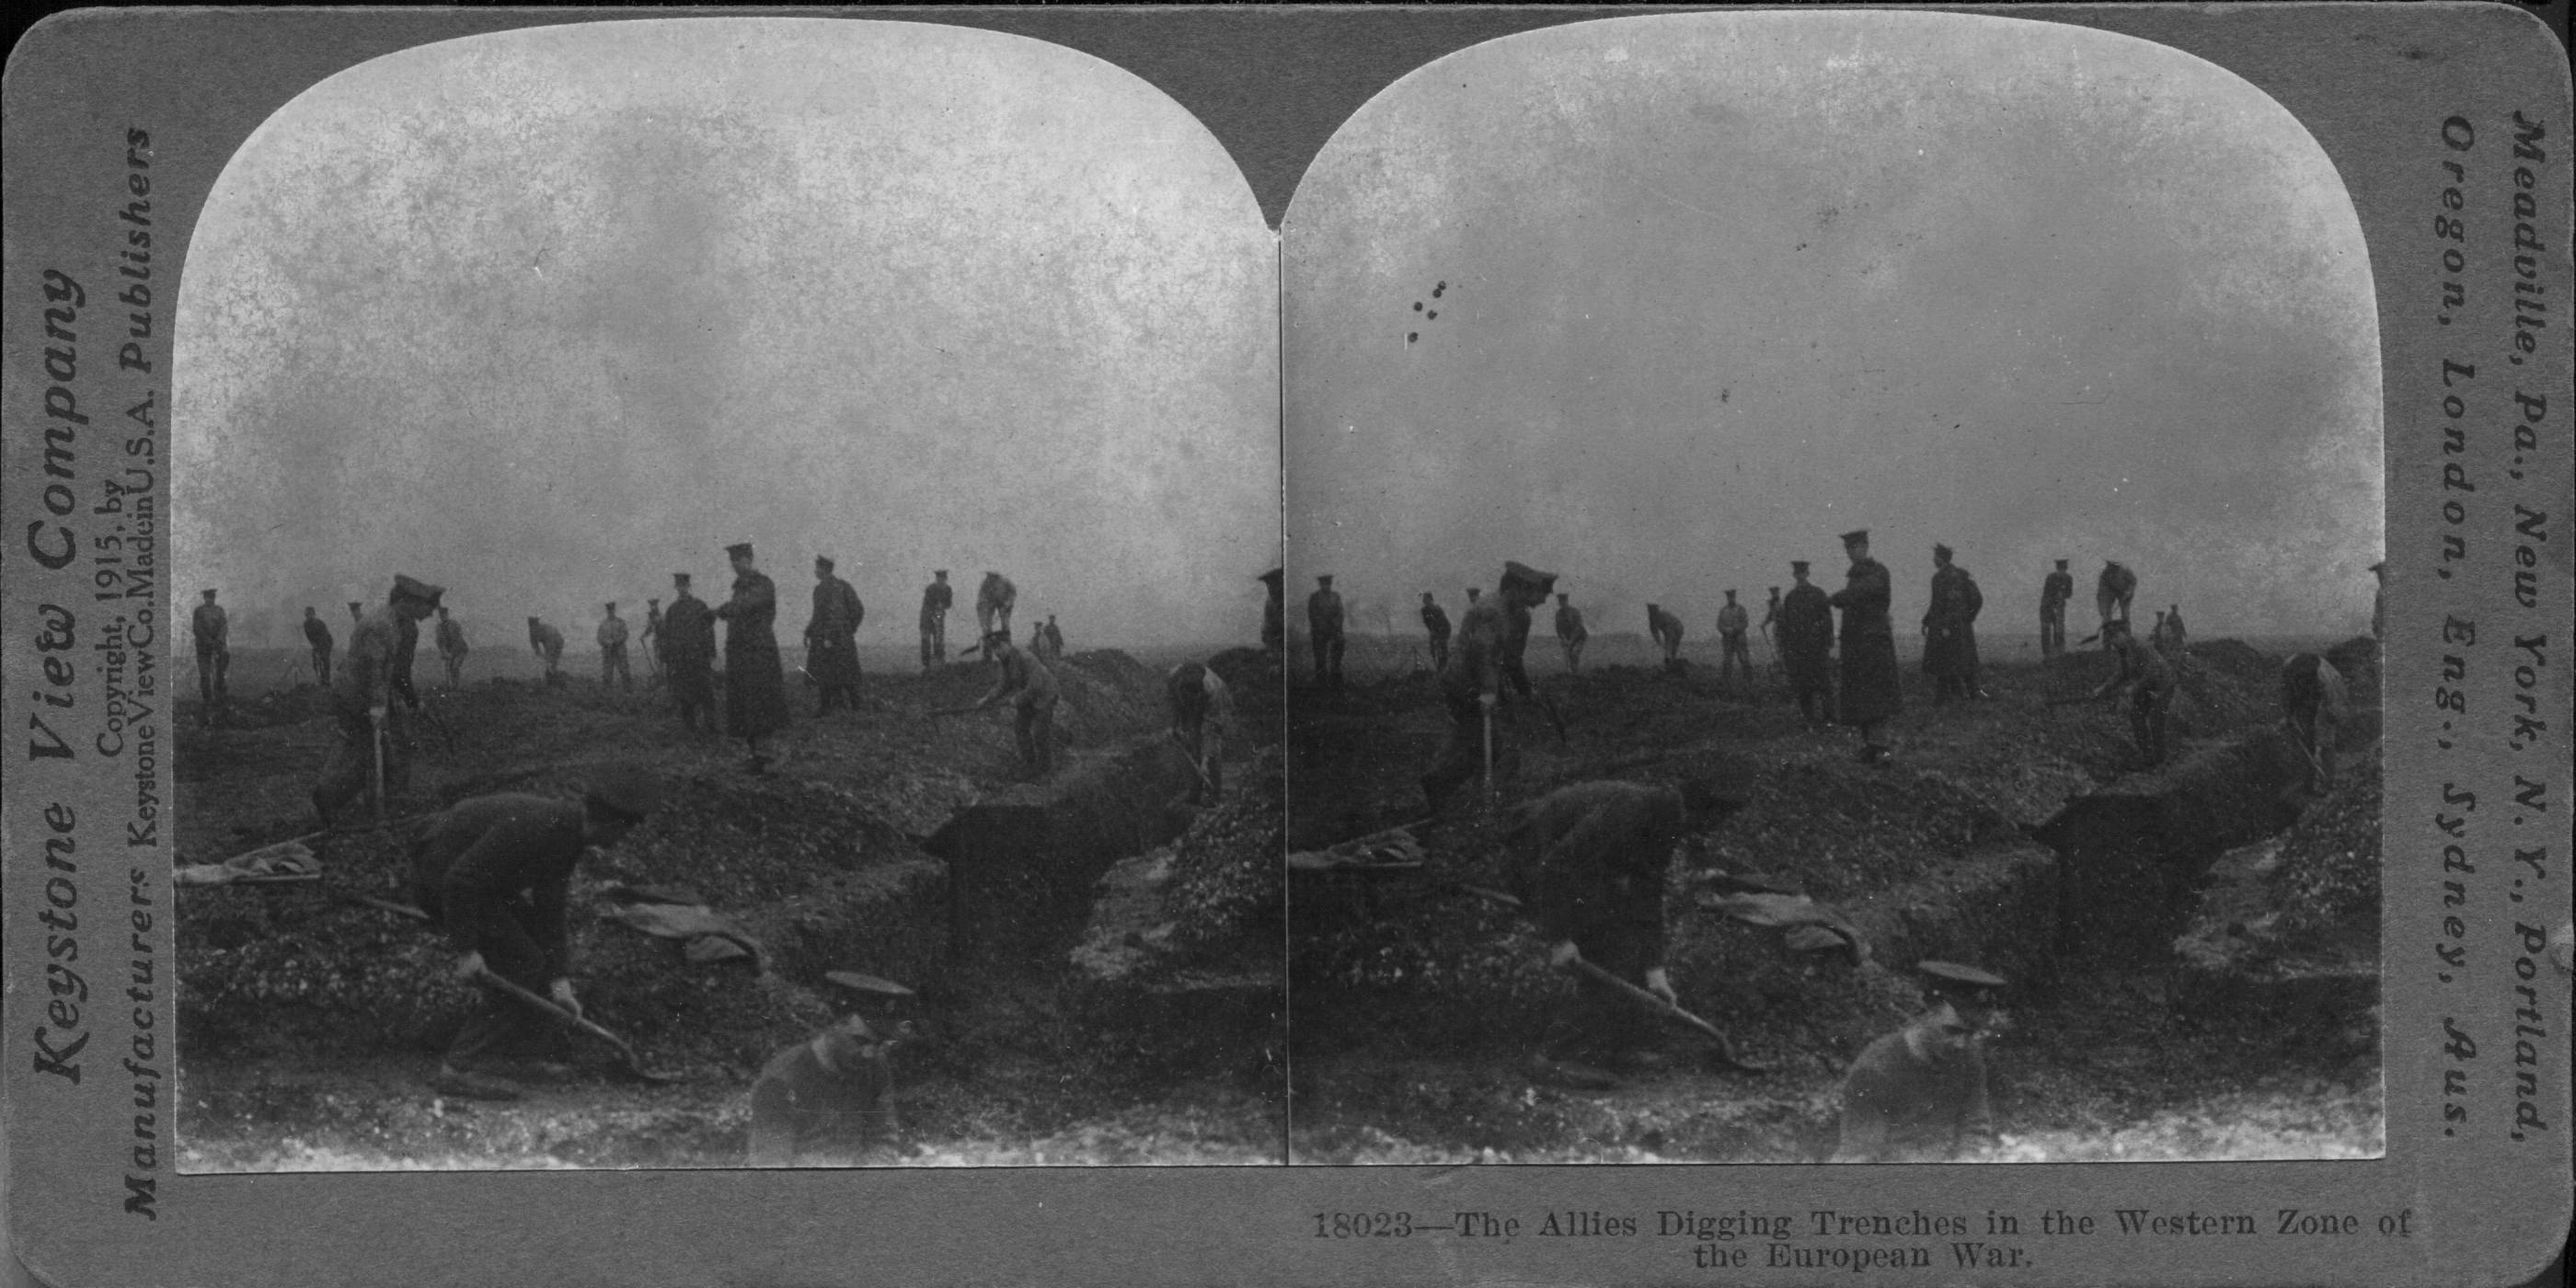 The Allies Digging Trenches in the Western Zone of the European War